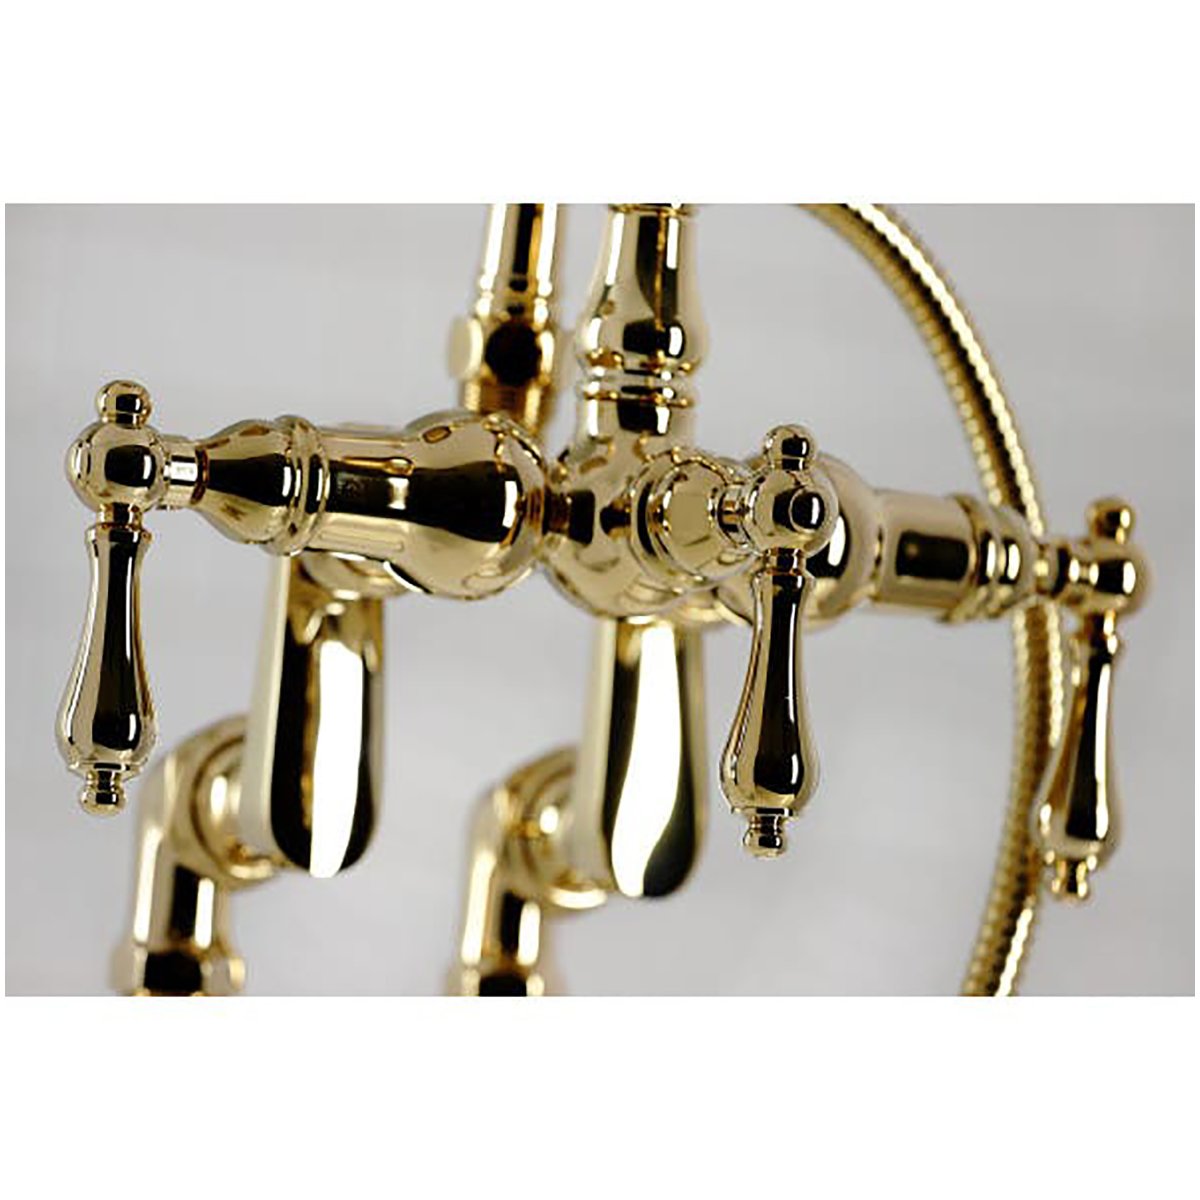 Kingston Brass CC6013TX-P Vintage Clawfoot Tub Faucet with Hand Shower